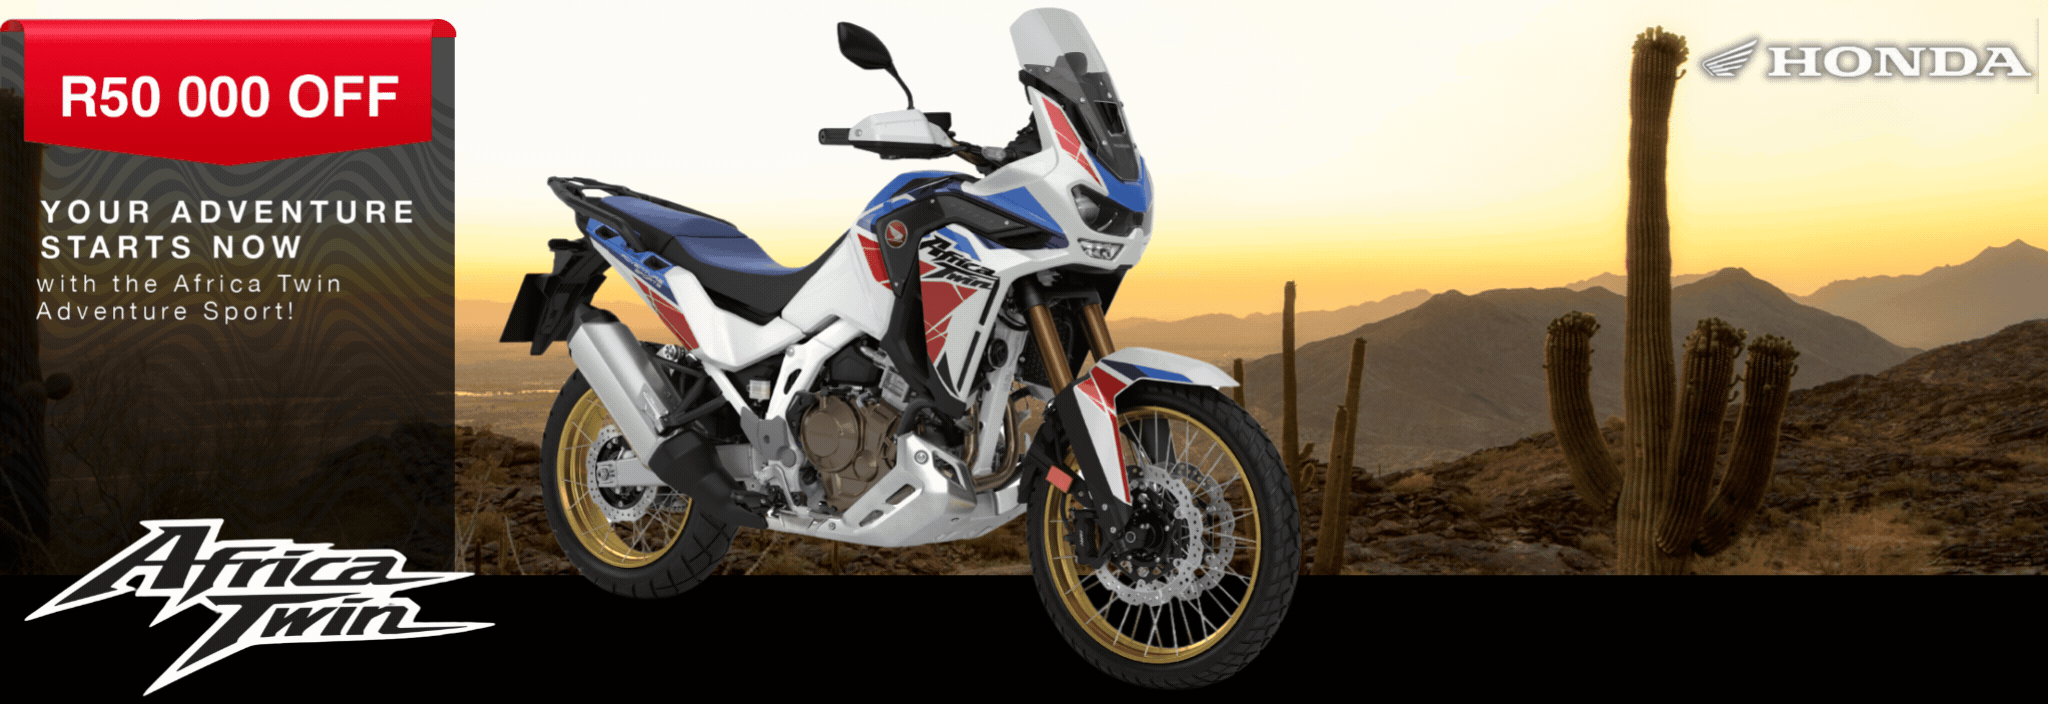 Honda motorcycles for sale South Africa Africa Twin special.